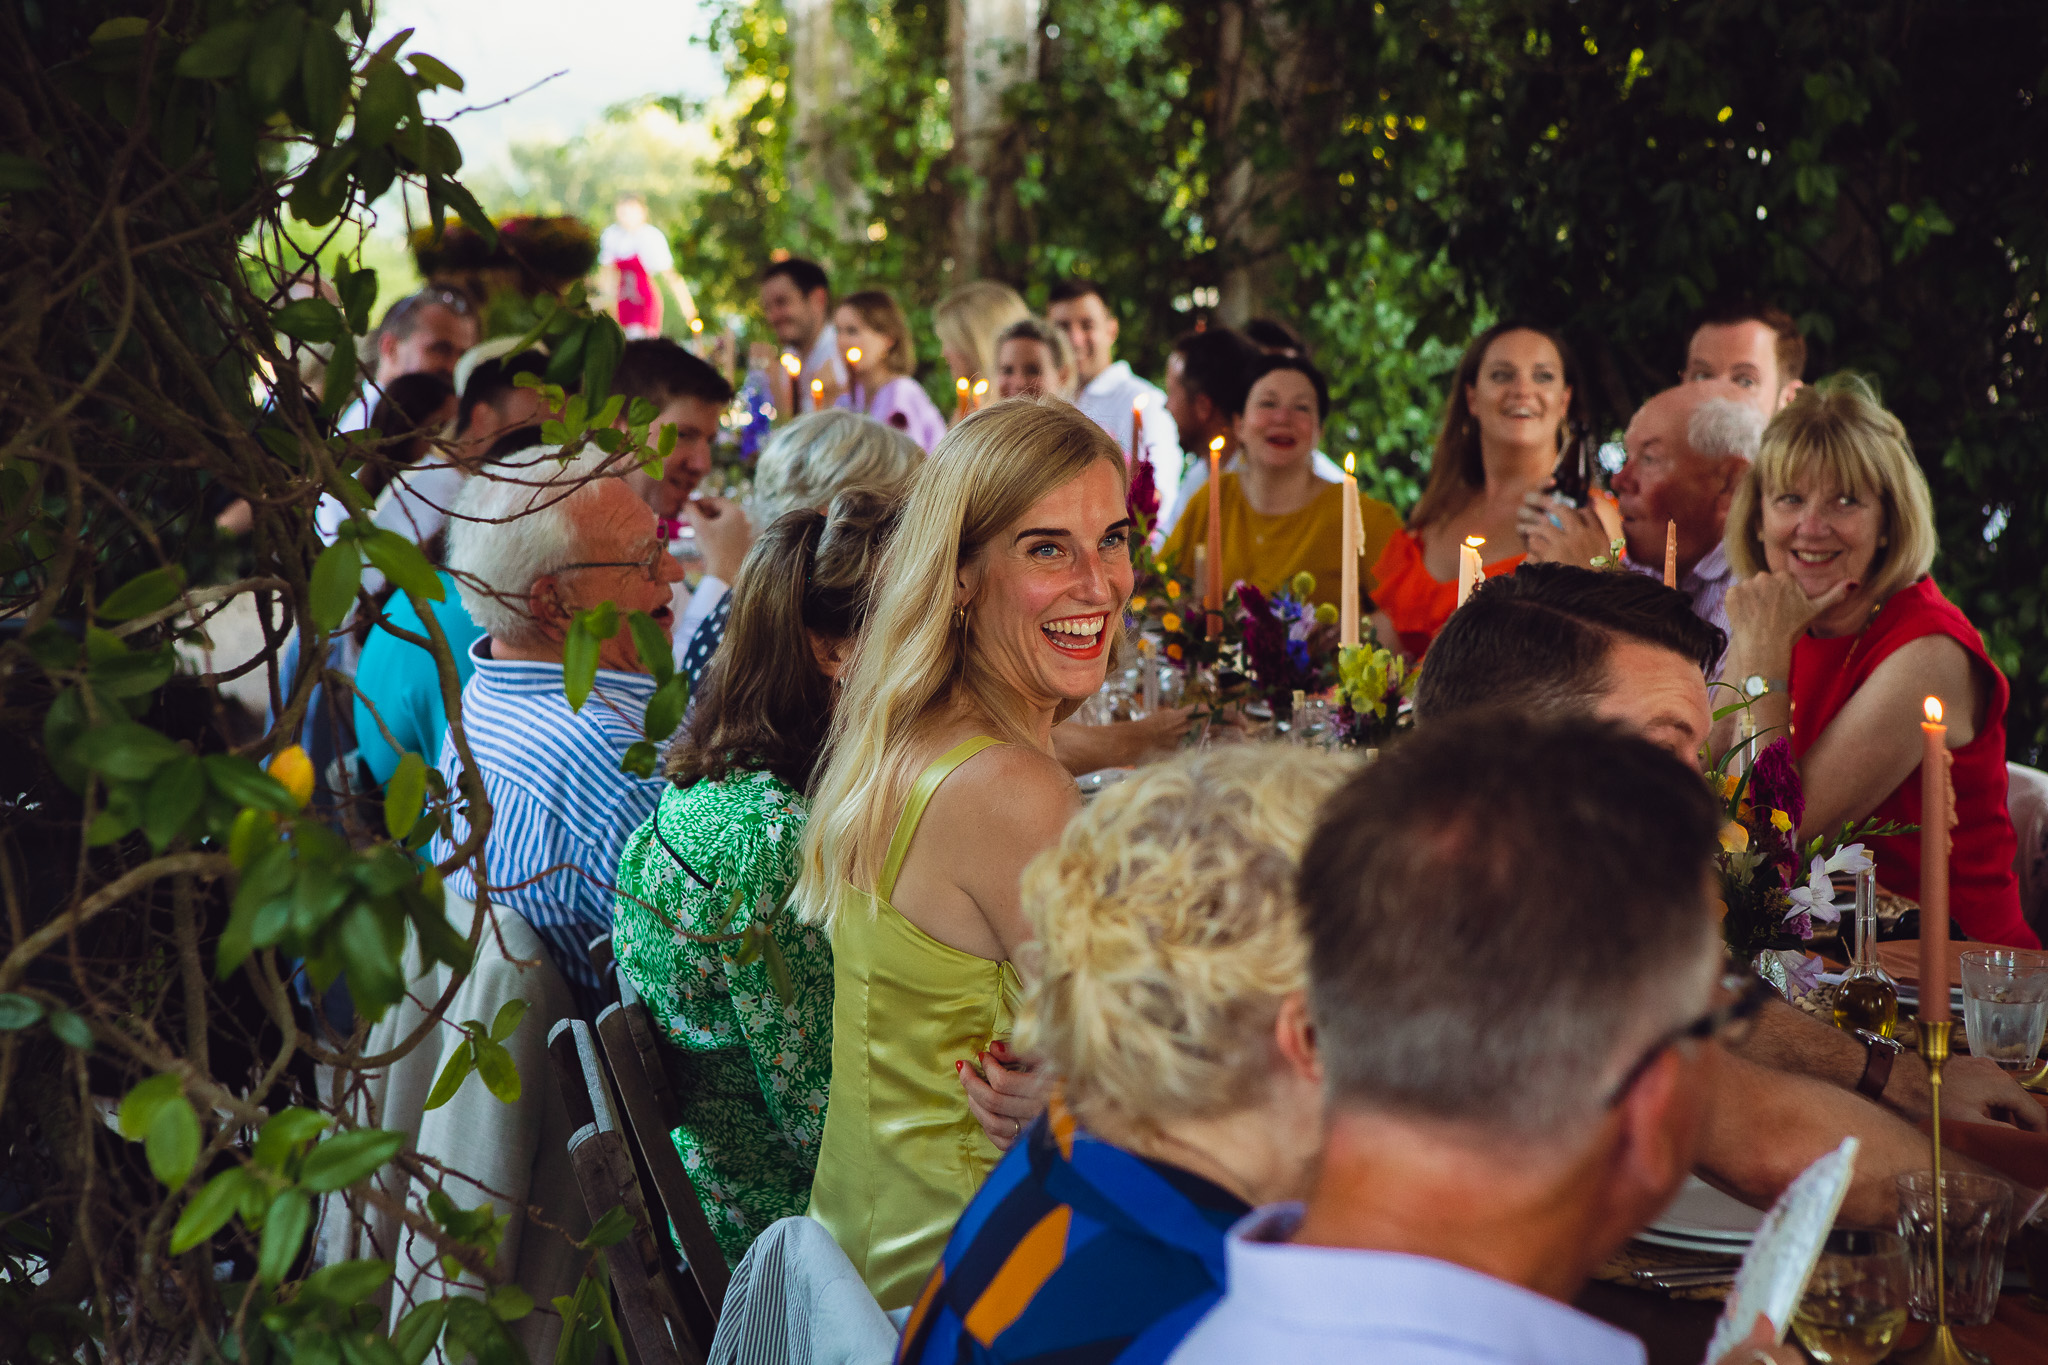 Helen laughs as she sits at the wedding dinner table with guests at Ambelonas Vineyard, Corfu